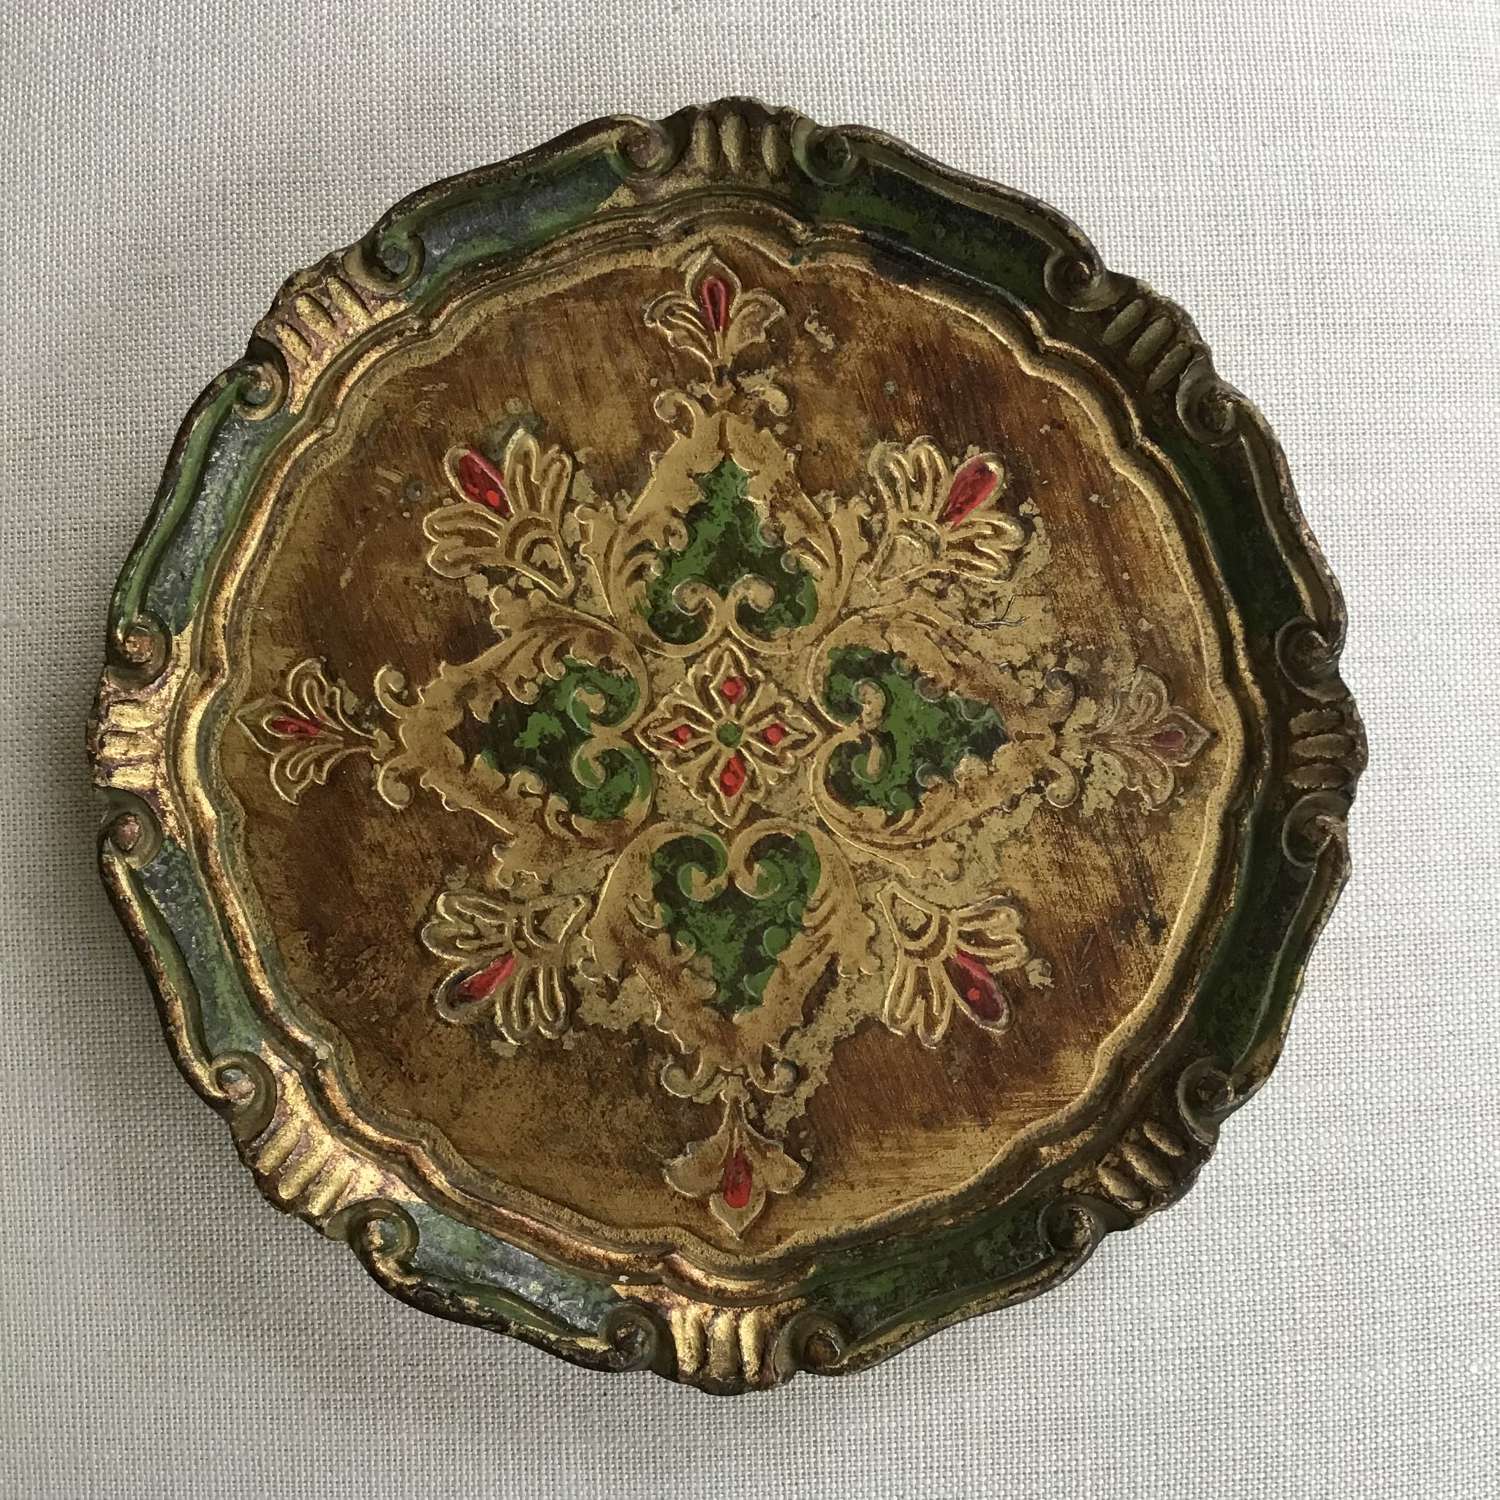 Vintage green and gold Florentine tray